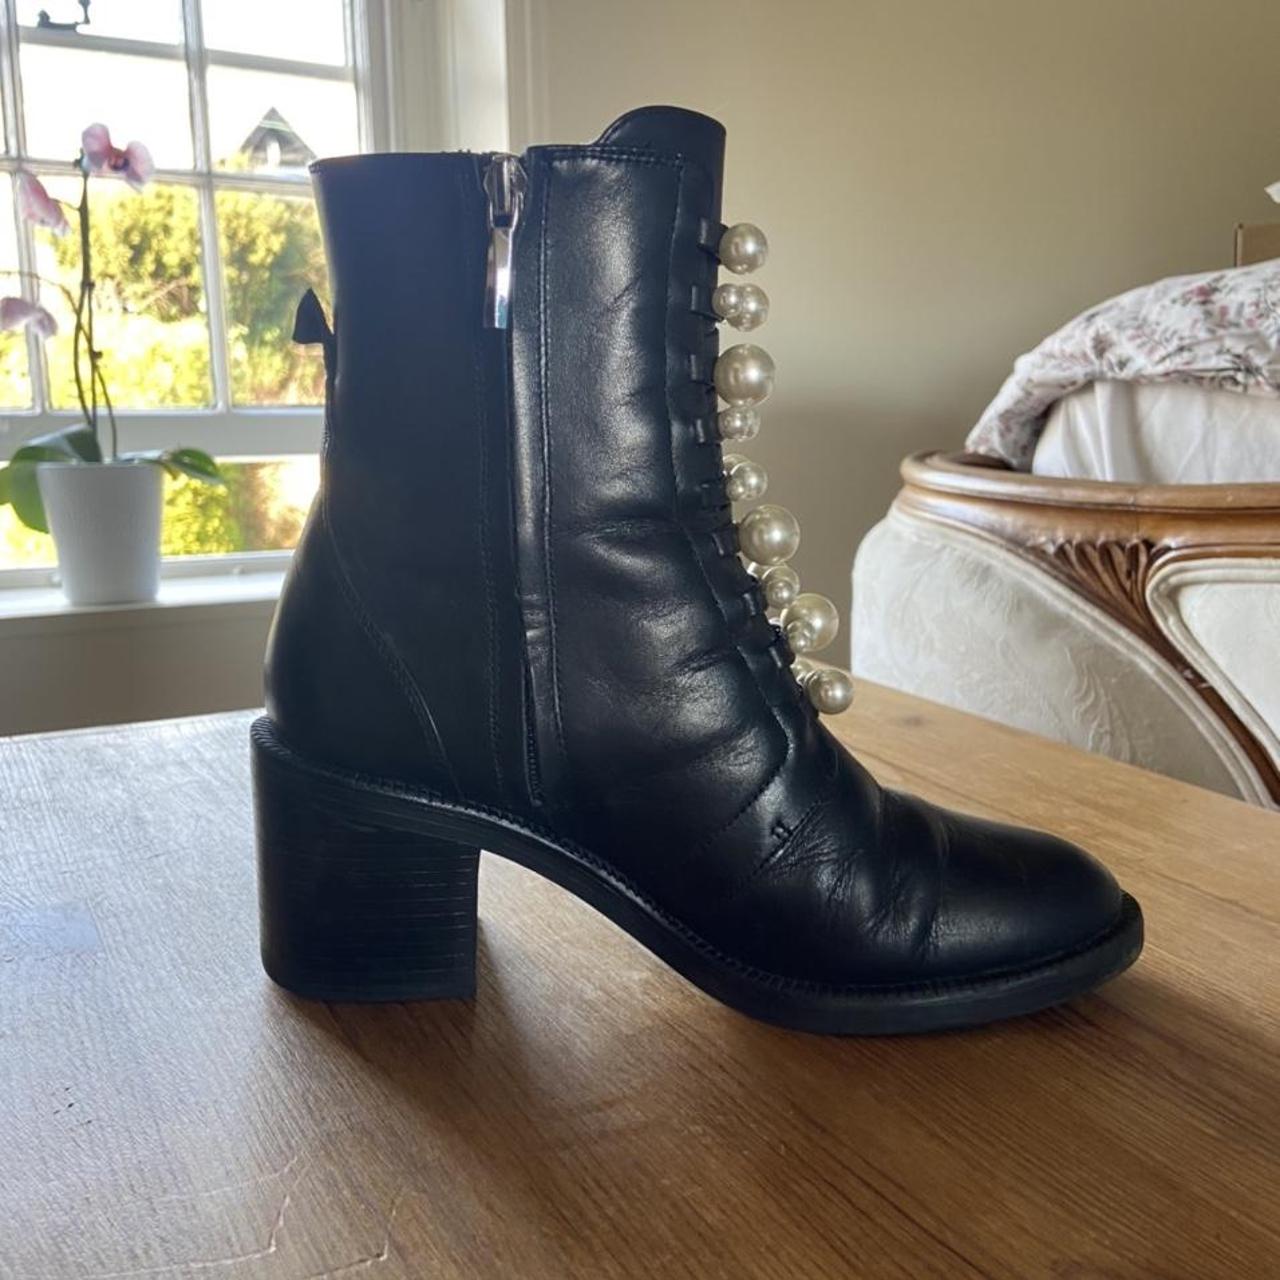 Zara - size 36 - Beautiful black leather boots with... - Depop